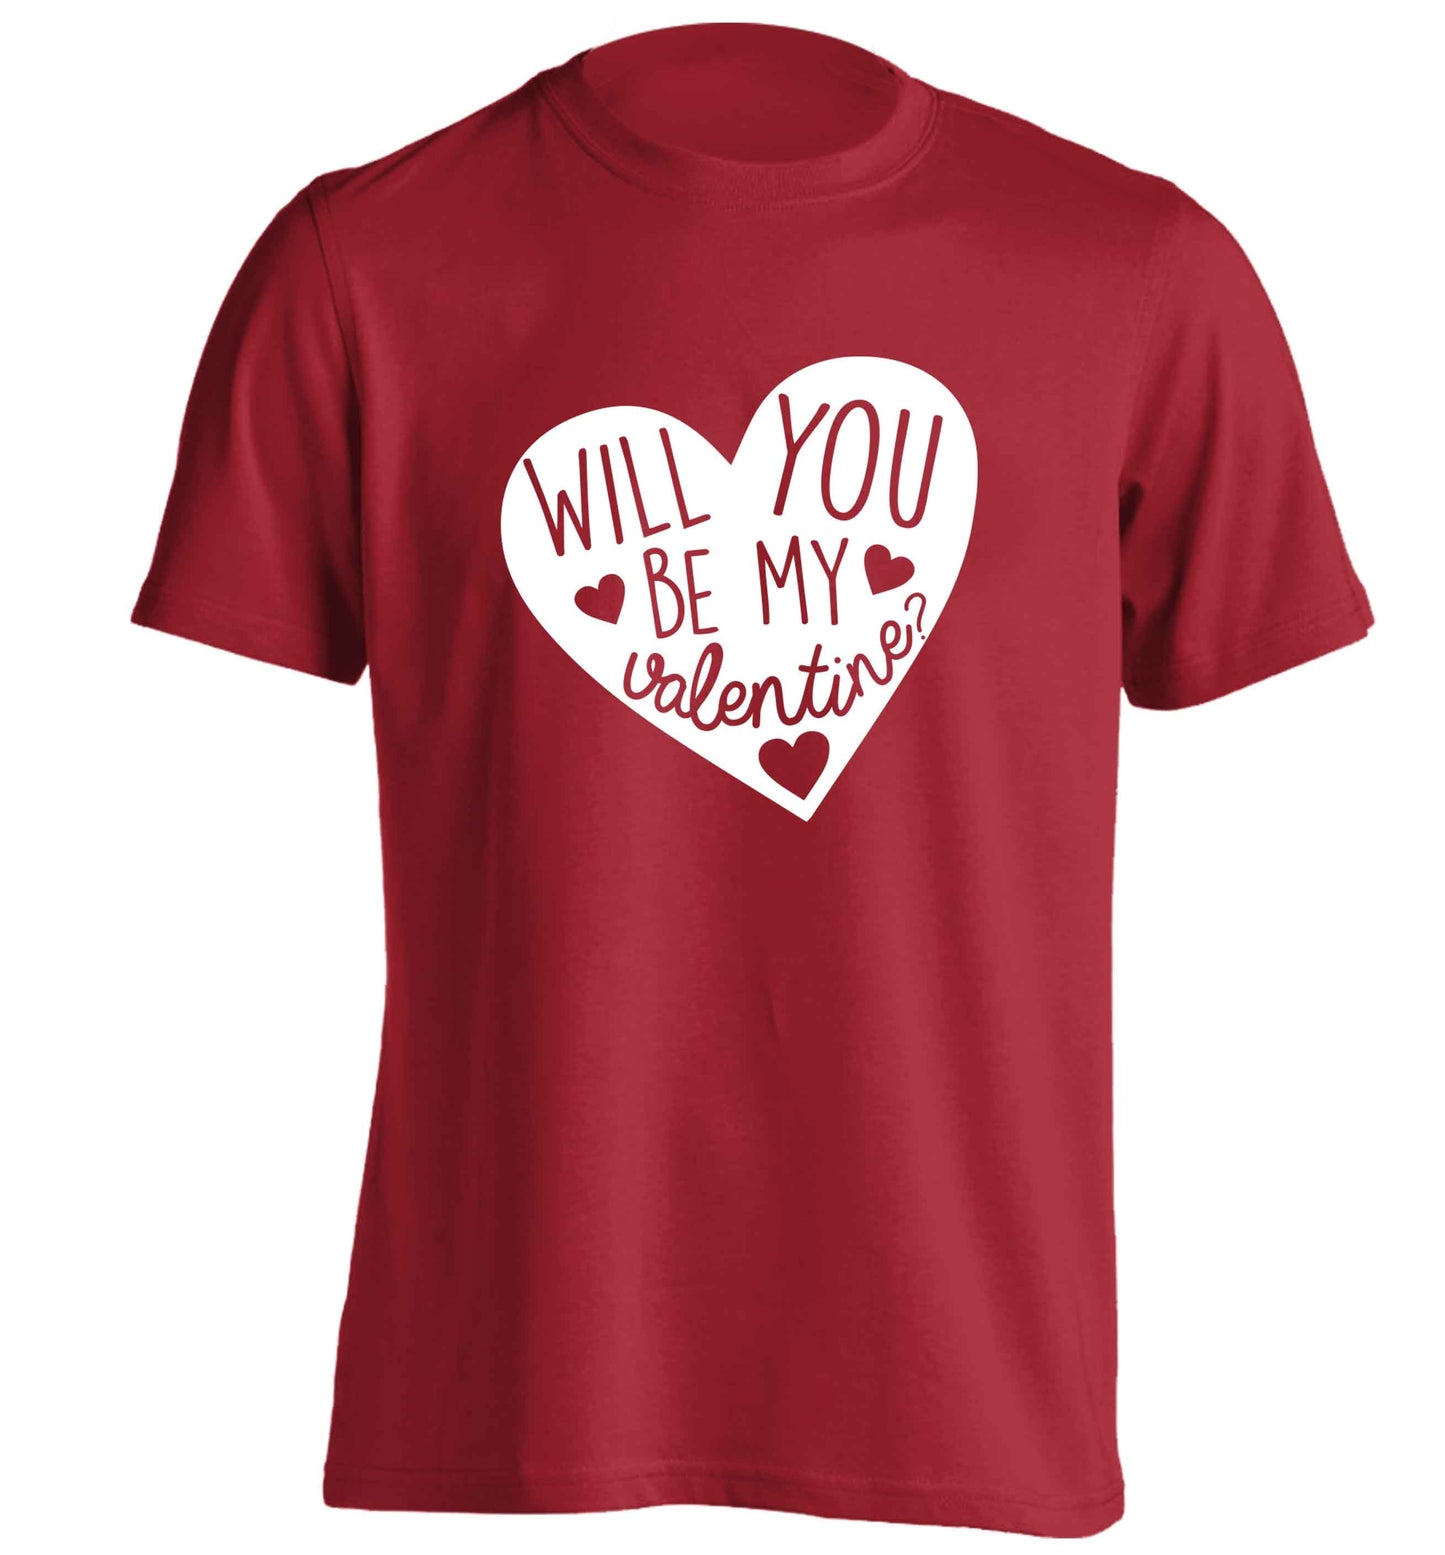 Will you be my valentine? adults unisex red Tshirt 2XL